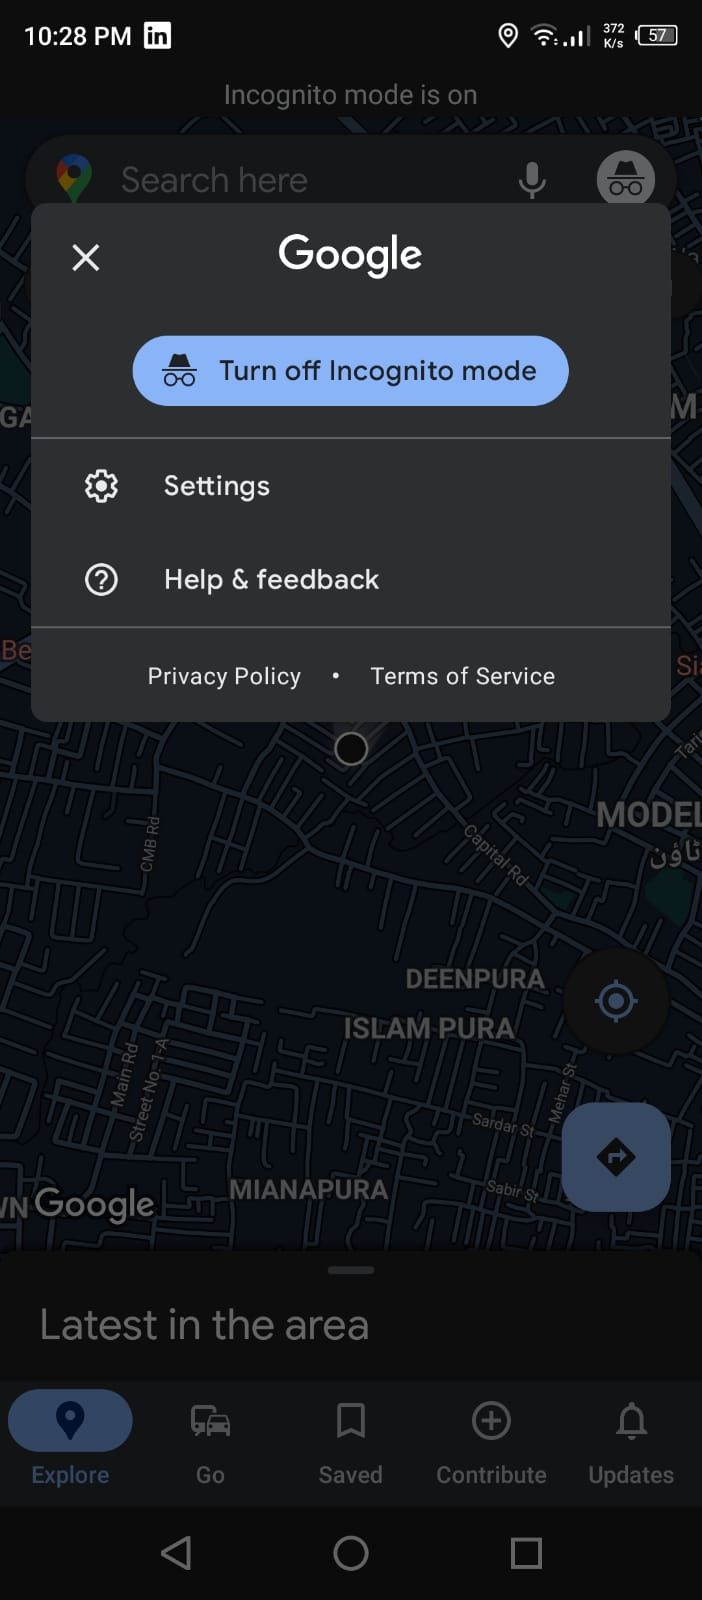 Google Maps App Turn Off Incognito Mode Option